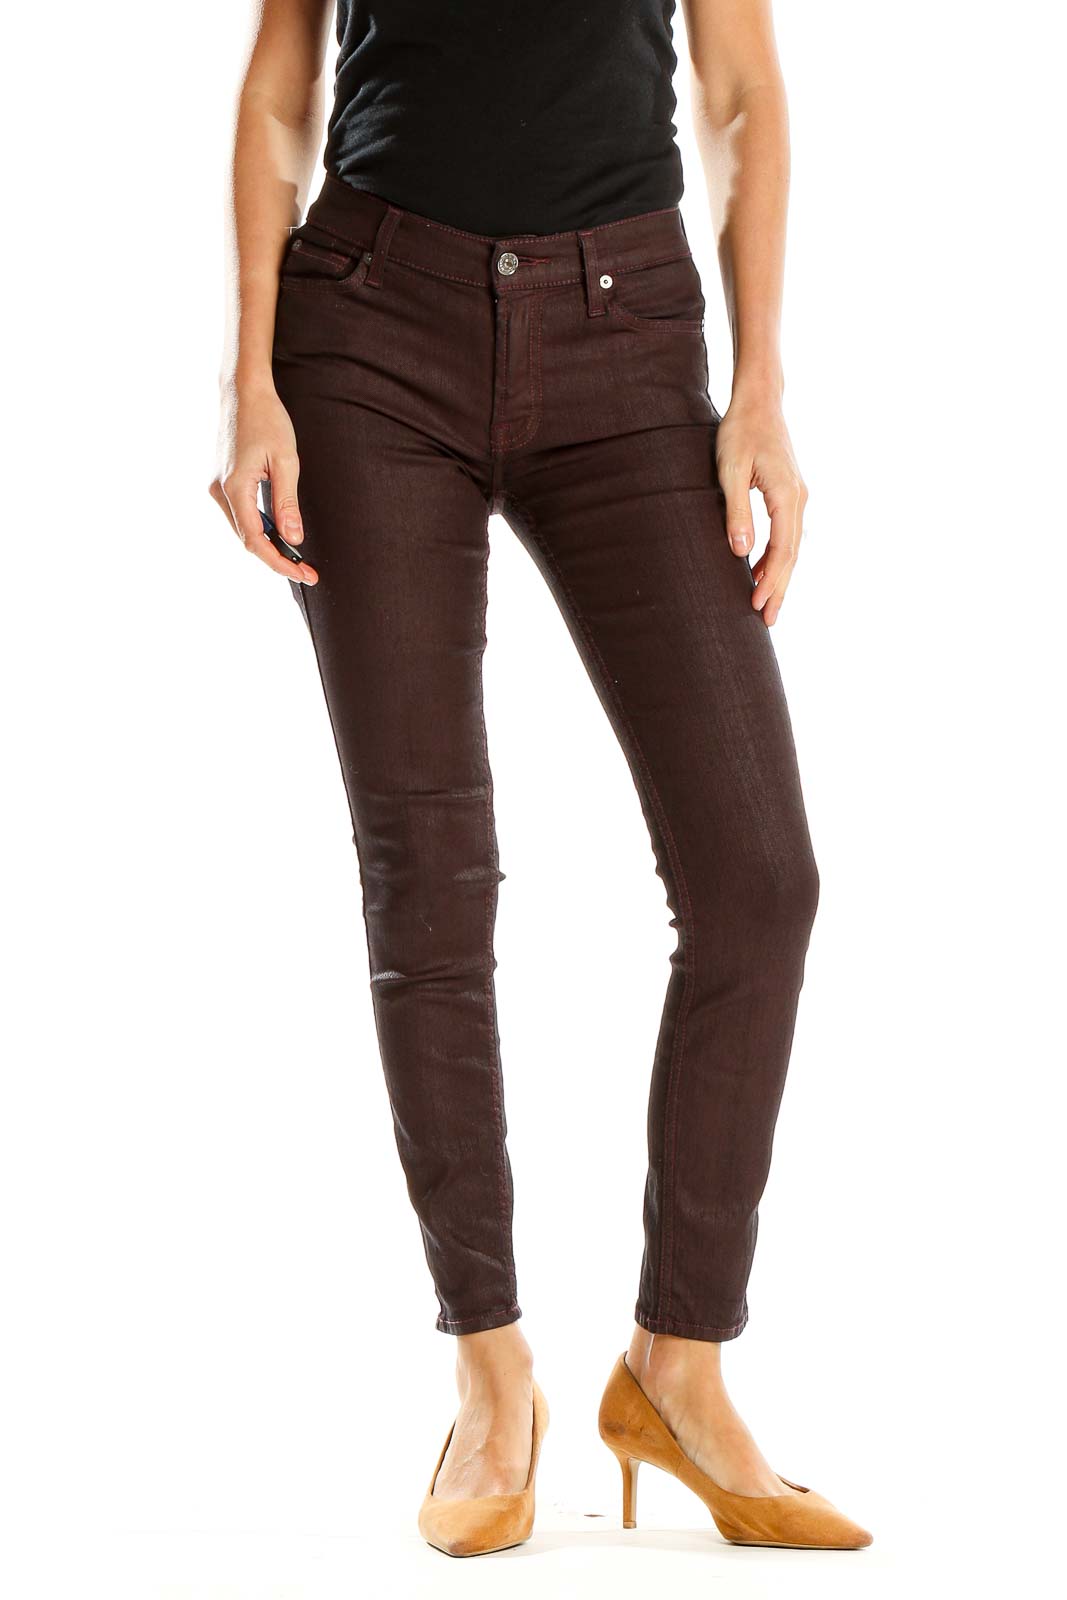 Brown Shimmery Skinny Jeans Front